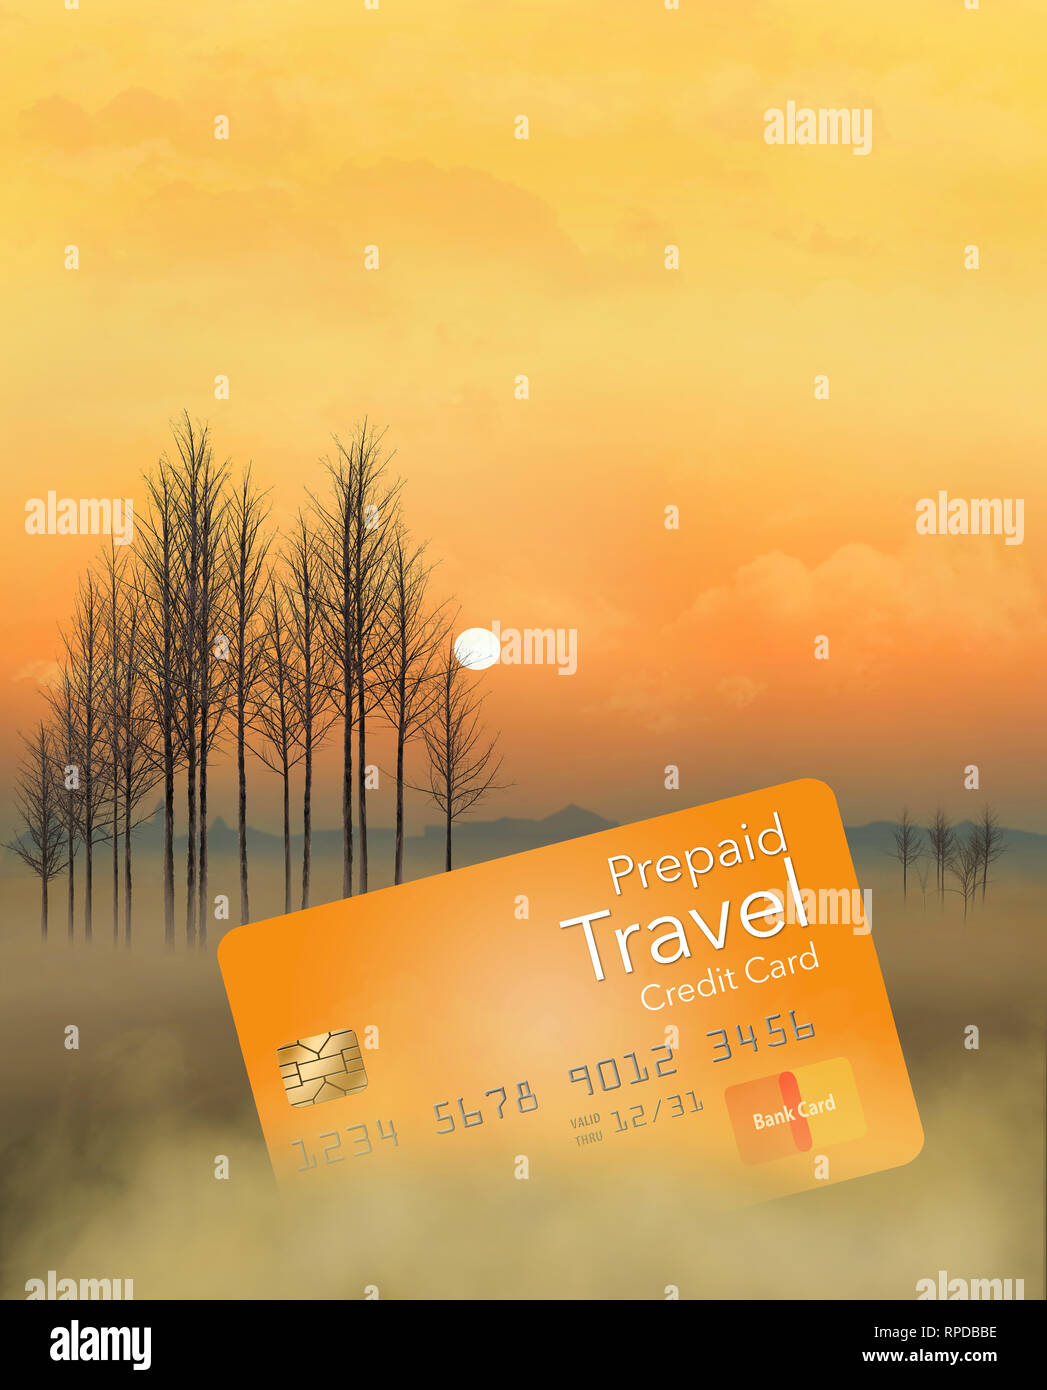 A prepaid travel credit card is seen in a meadow at sunrise with trees, fog, sky and clouds. This is an illustration Stock Photo